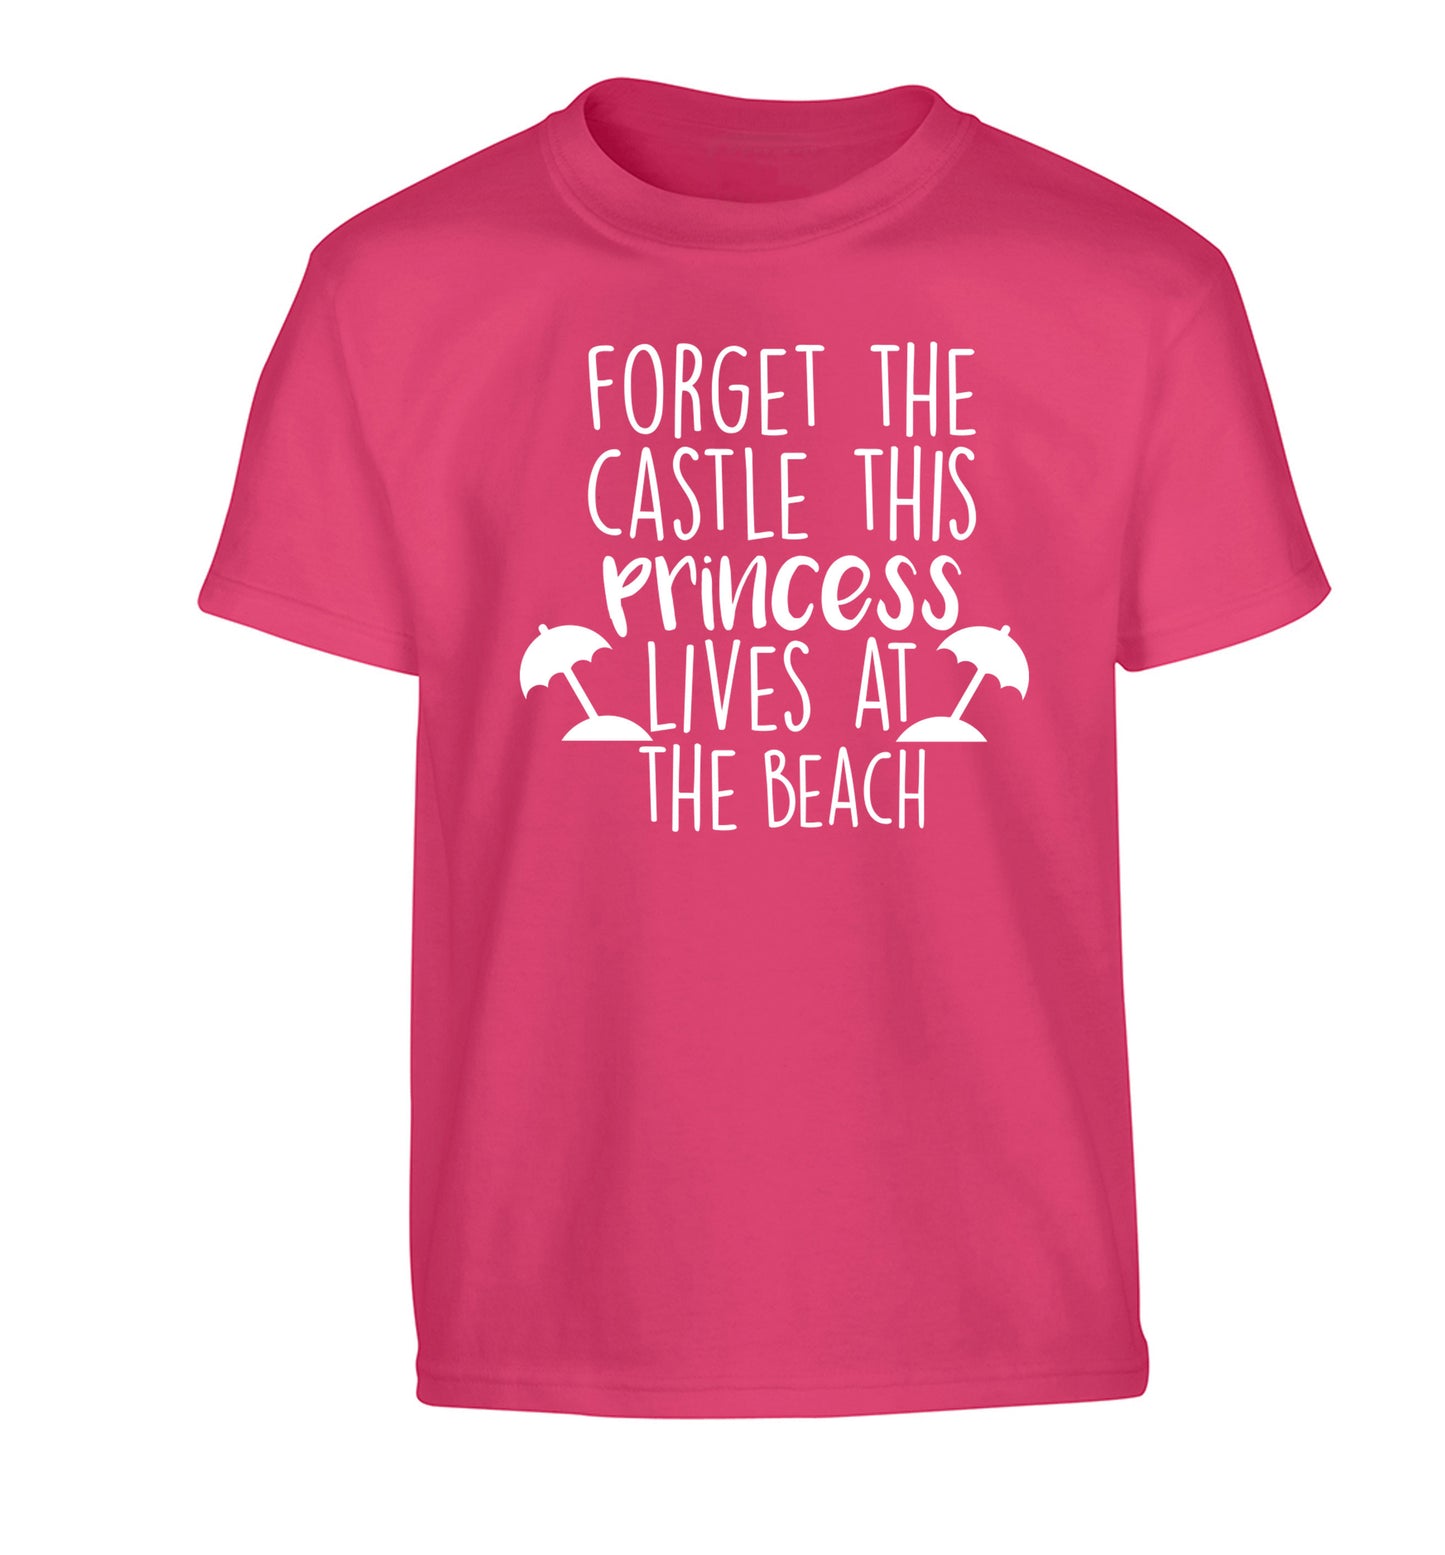 Forget the castle this princess lives at the beach Children's pink Tshirt 12-14 Years